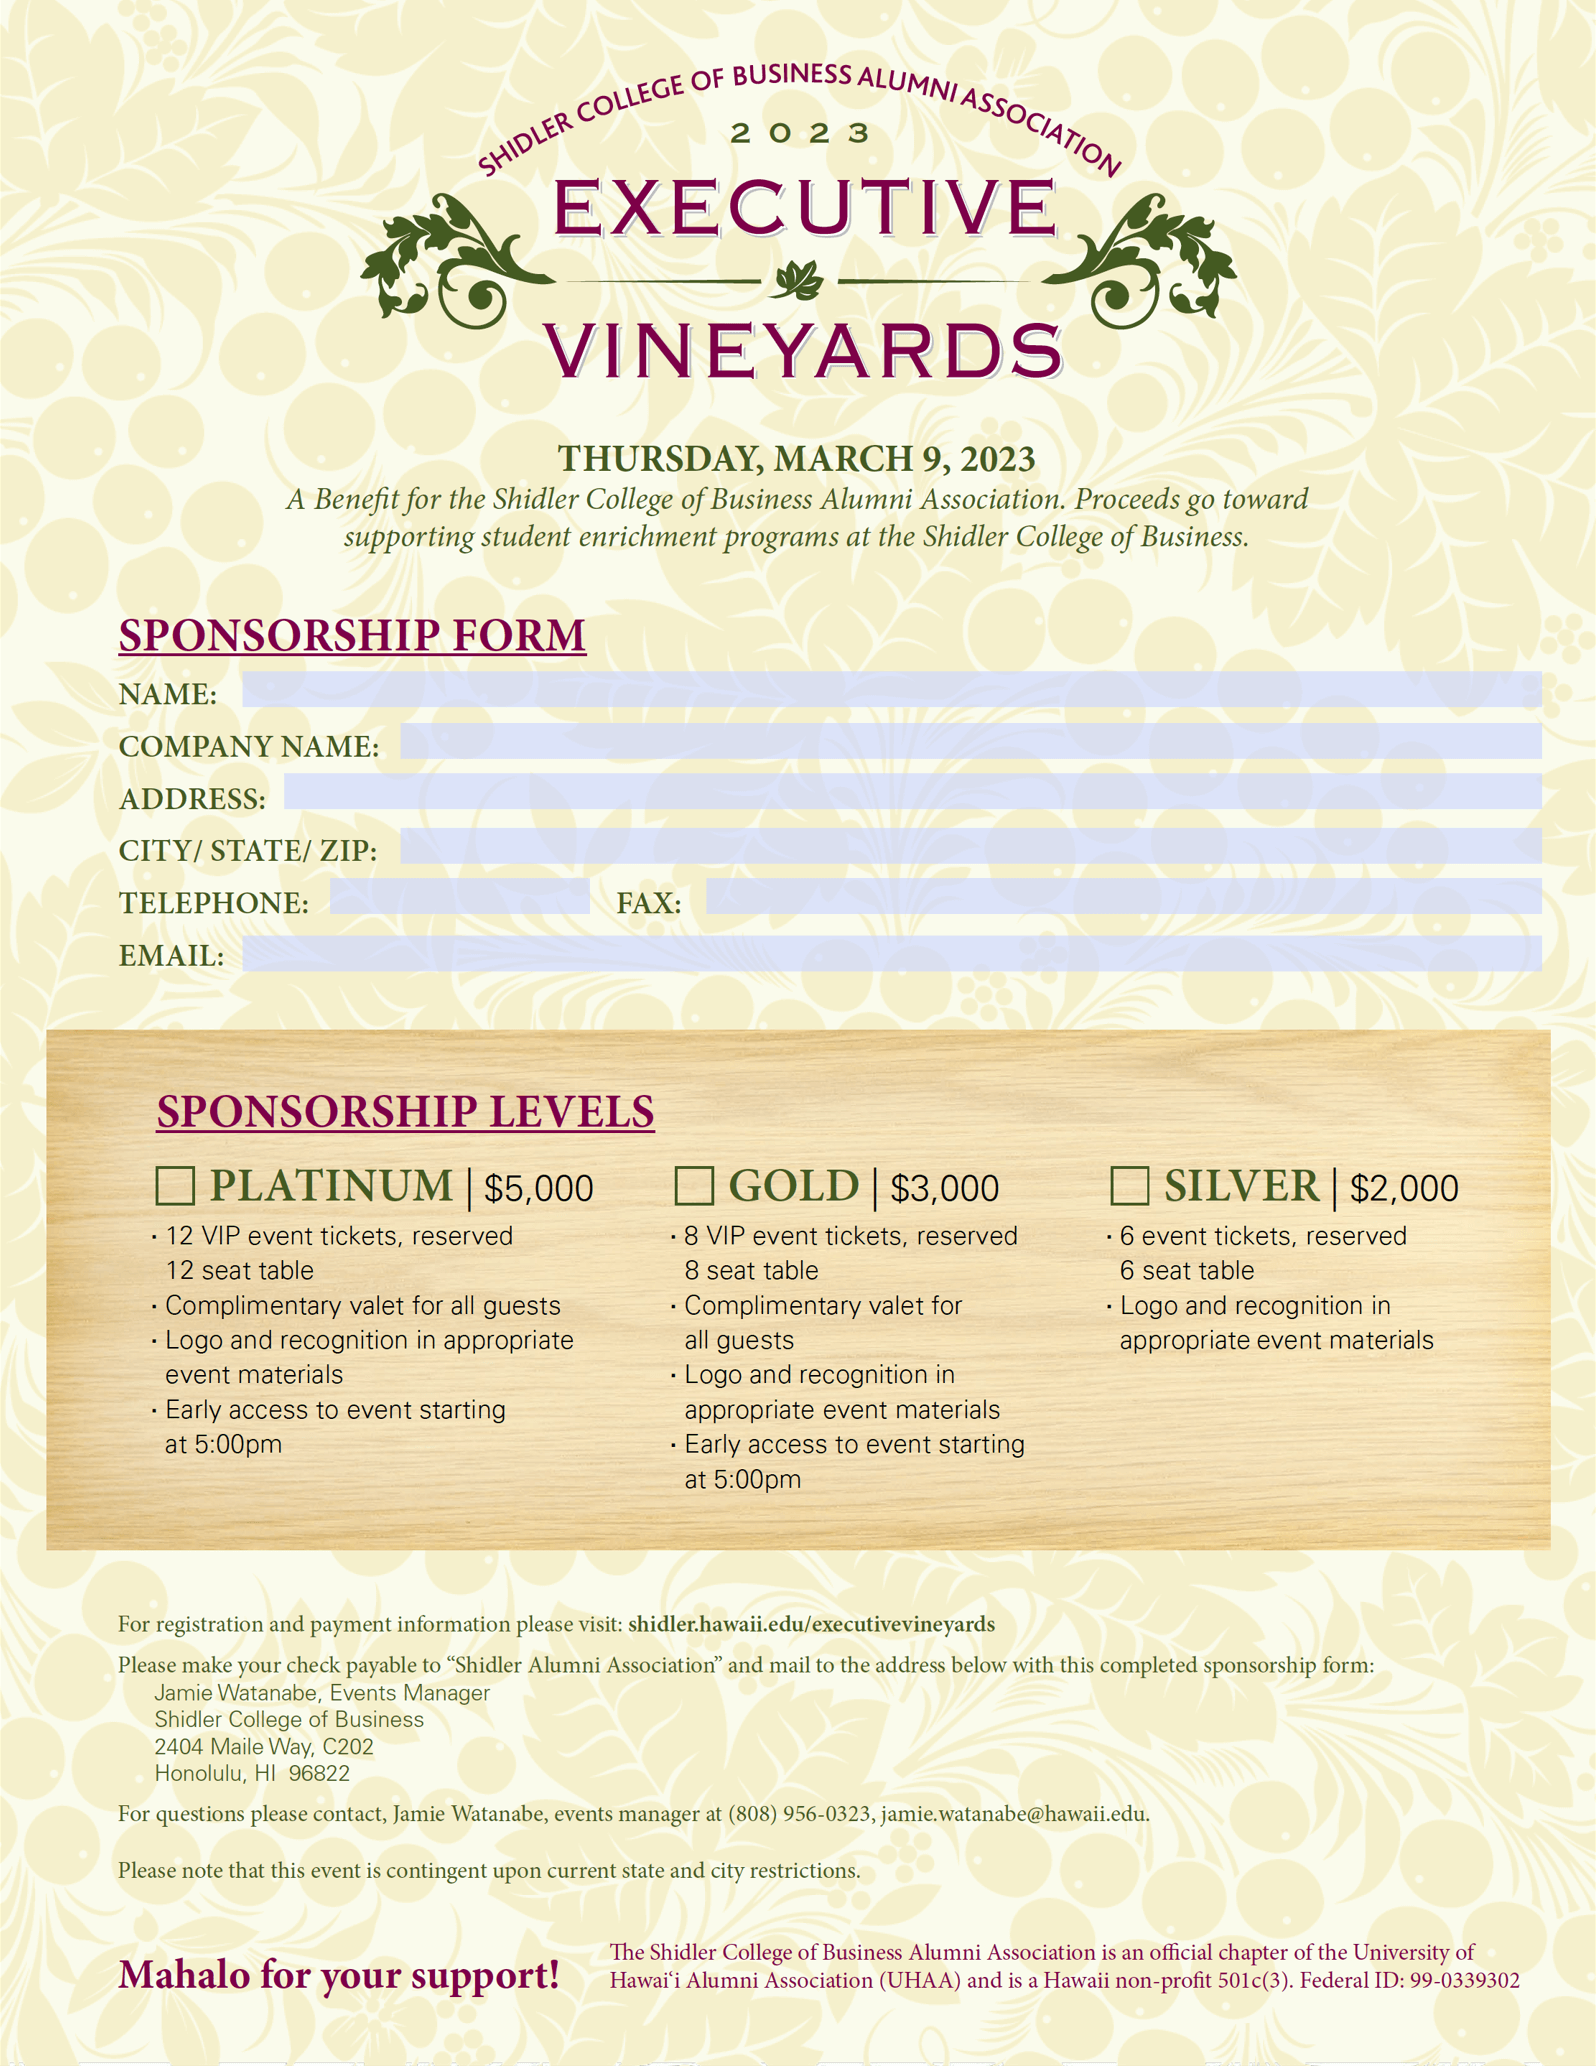 Screenshtot of this year's Executive Vineyards Flyer